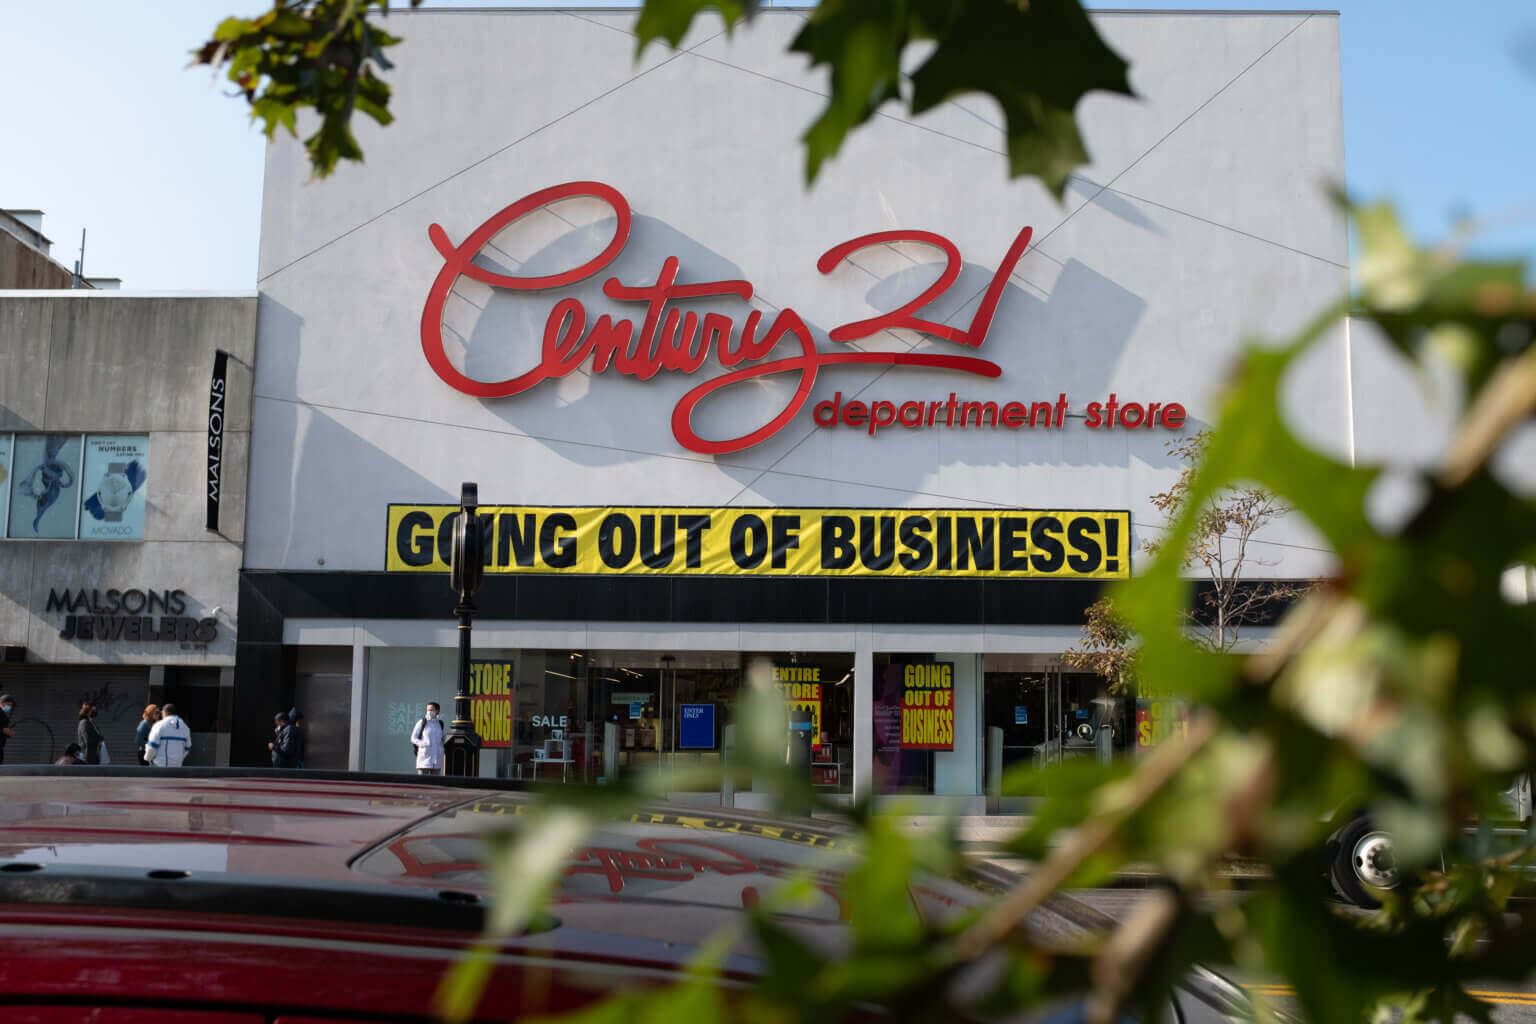 exterior of the century 21 store with going out of business sign